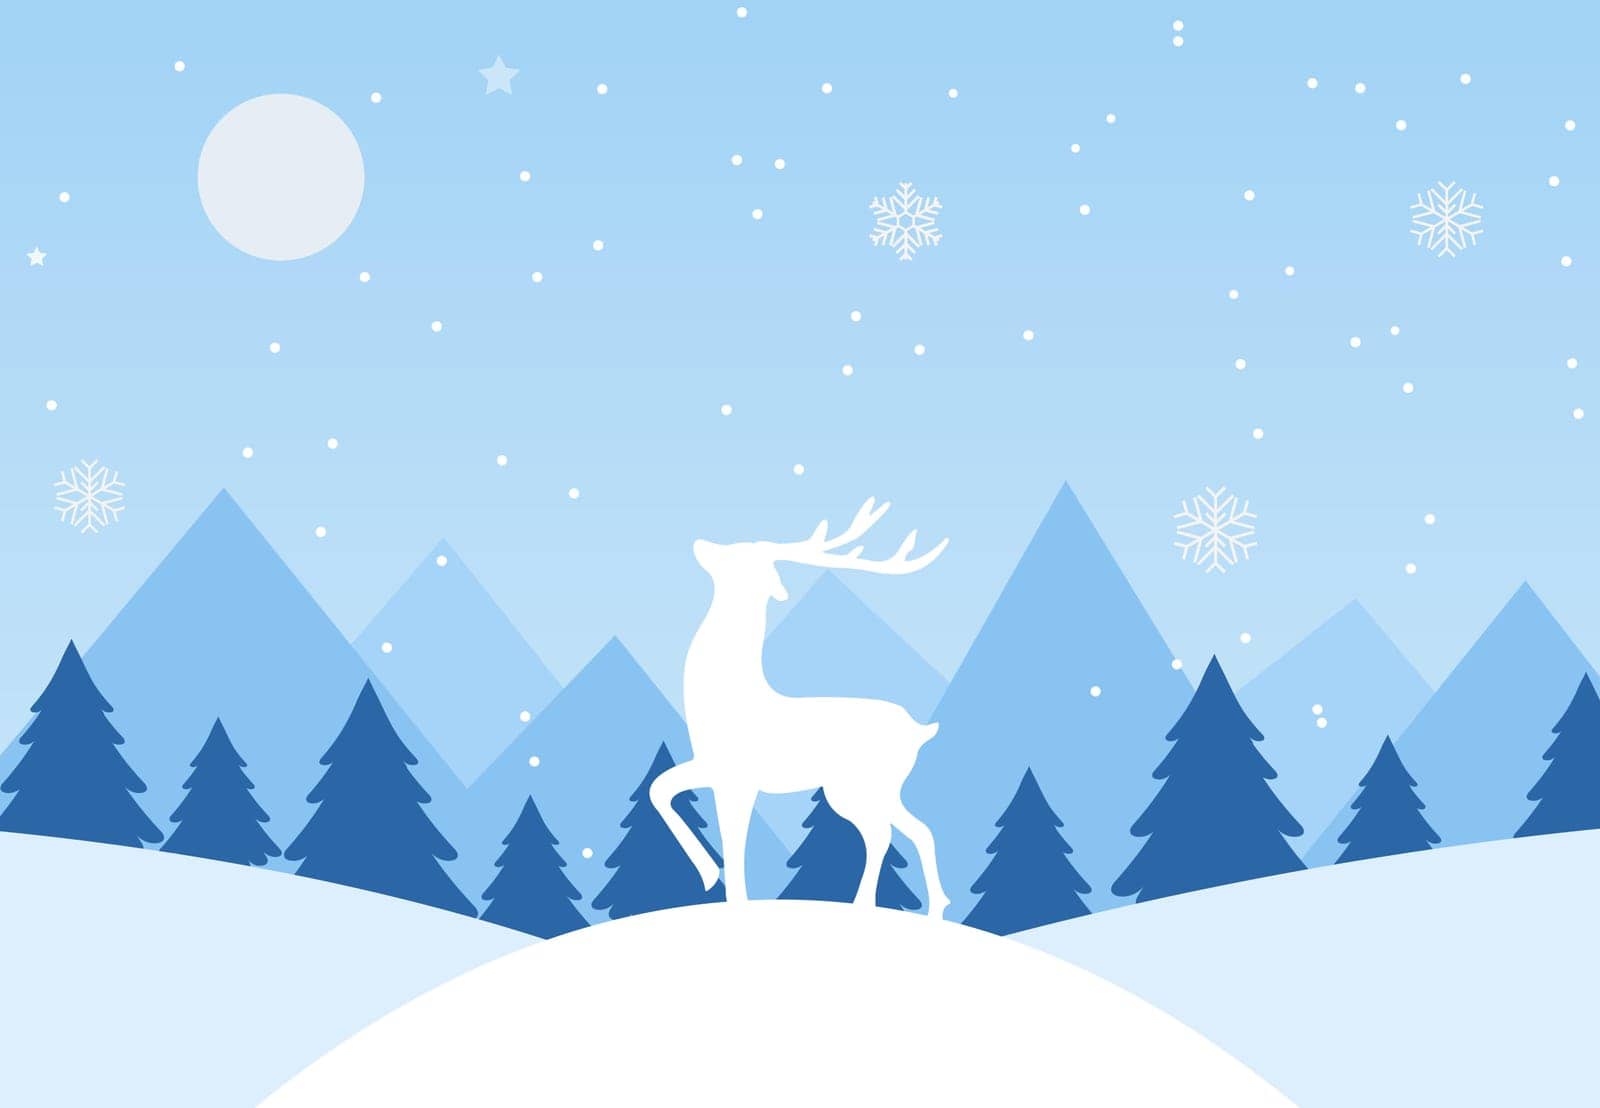 Winter landscape with mountains, forest, snowdrifts and deer. Winter greeting card. Vector